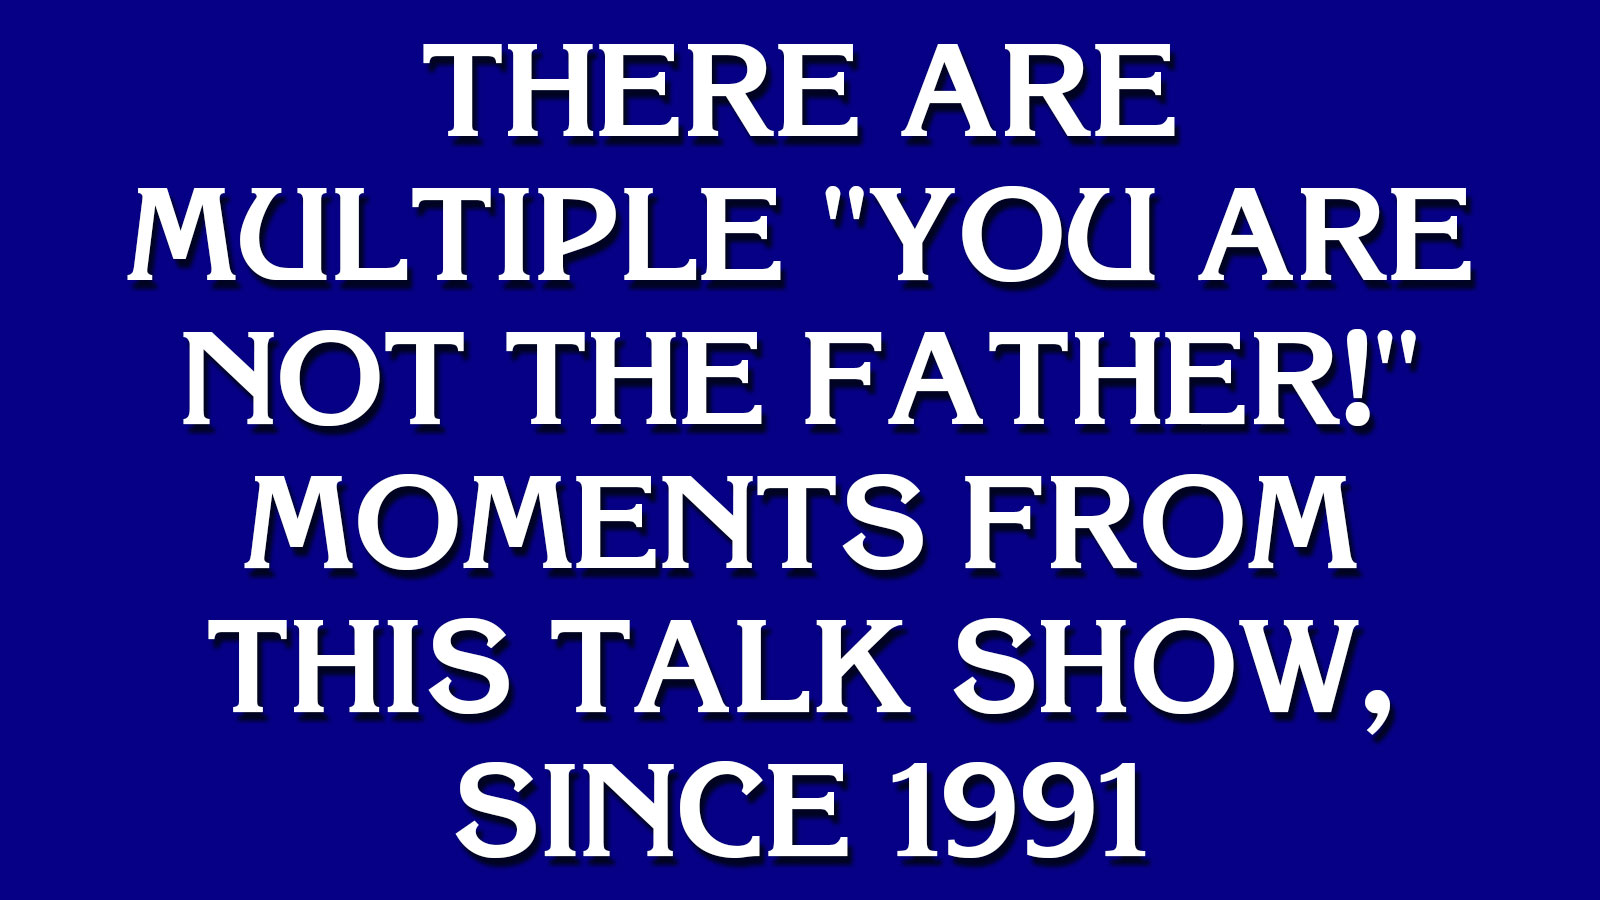 Can You Go on “Jeopardy!”? 134